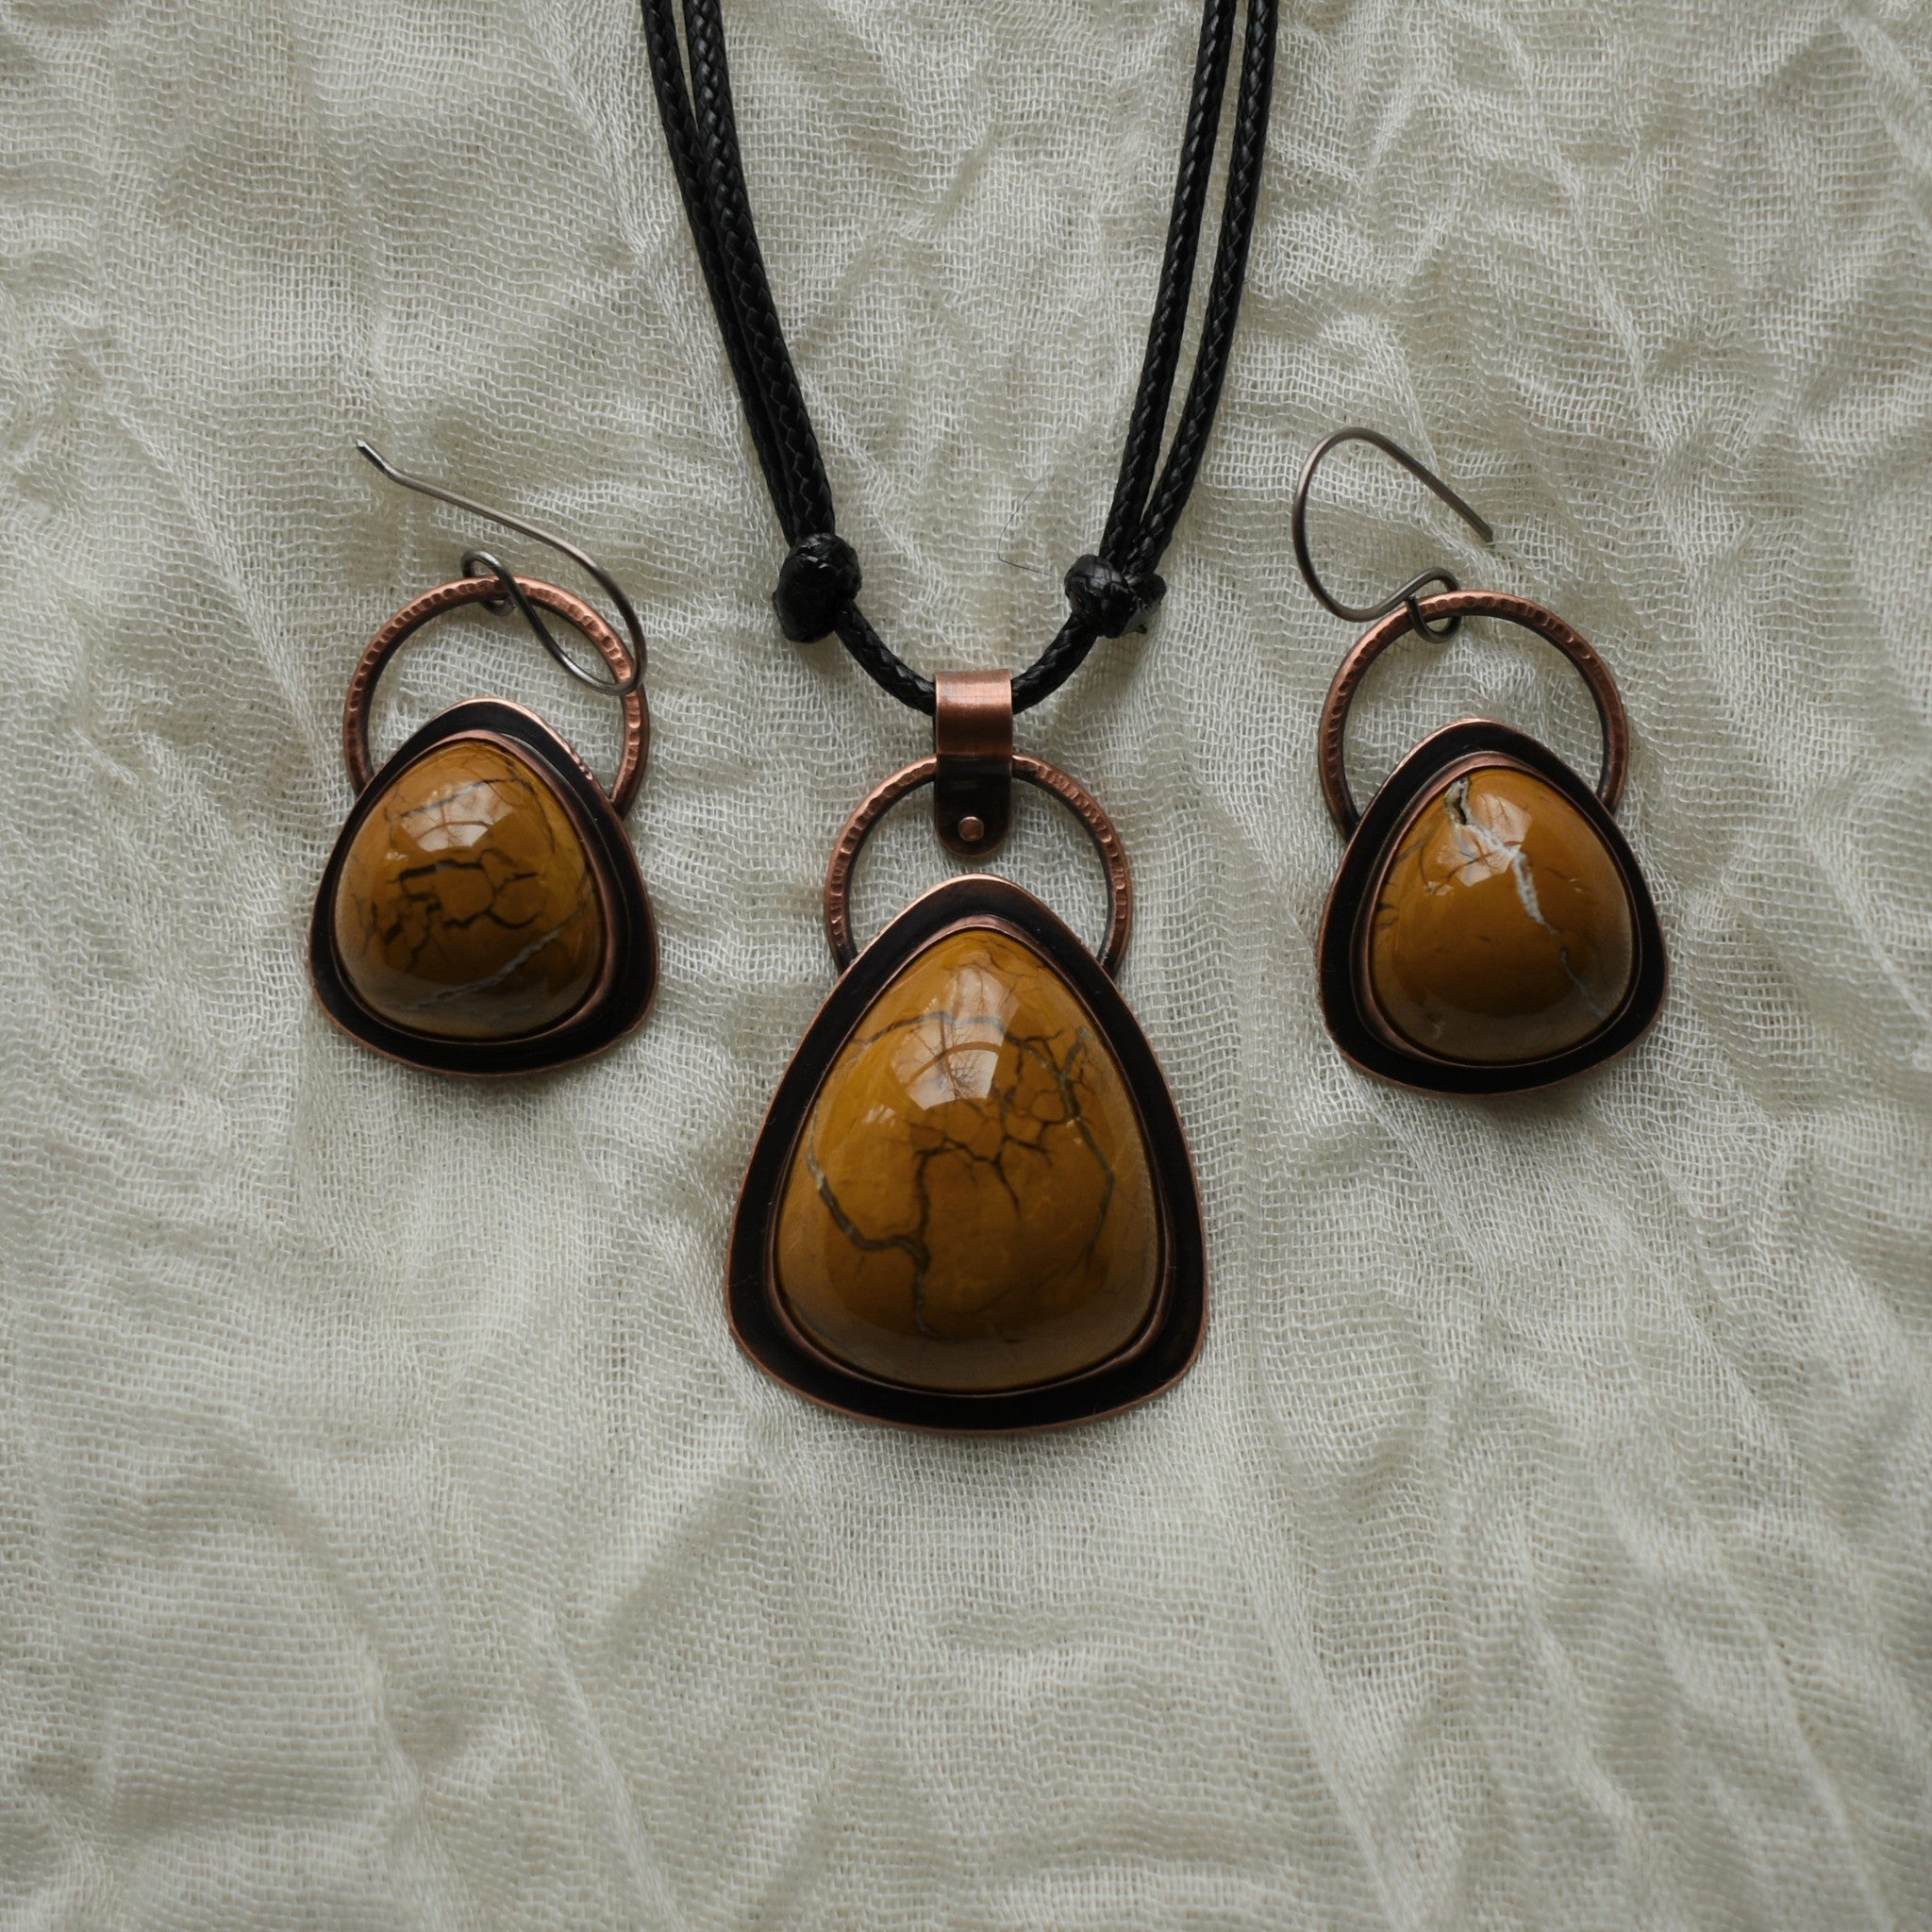 Nature inspired copper jewelry designs for the Pacific Northwest spirit.